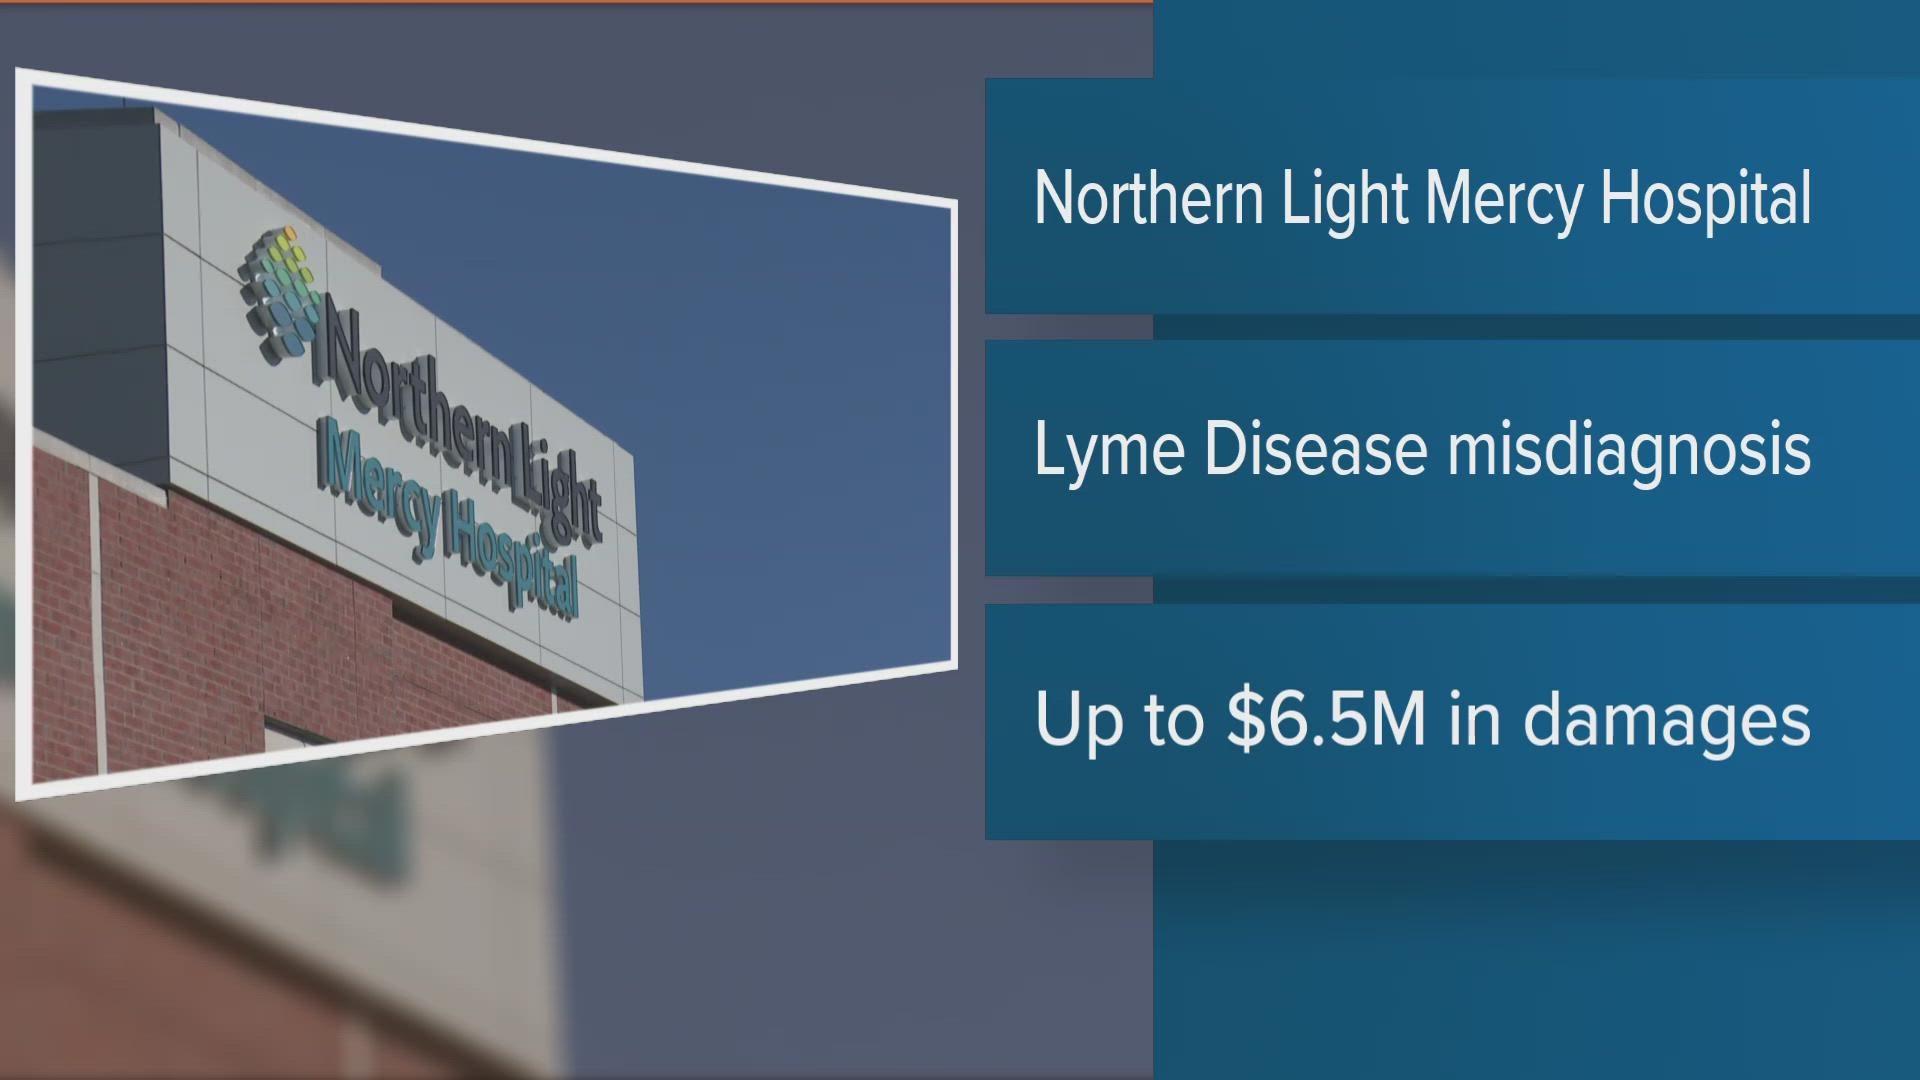 Peter Smith died of Lyme disease in 2017, after a doctor at Northern Light Mercy Hospital allegedly missed the signs.